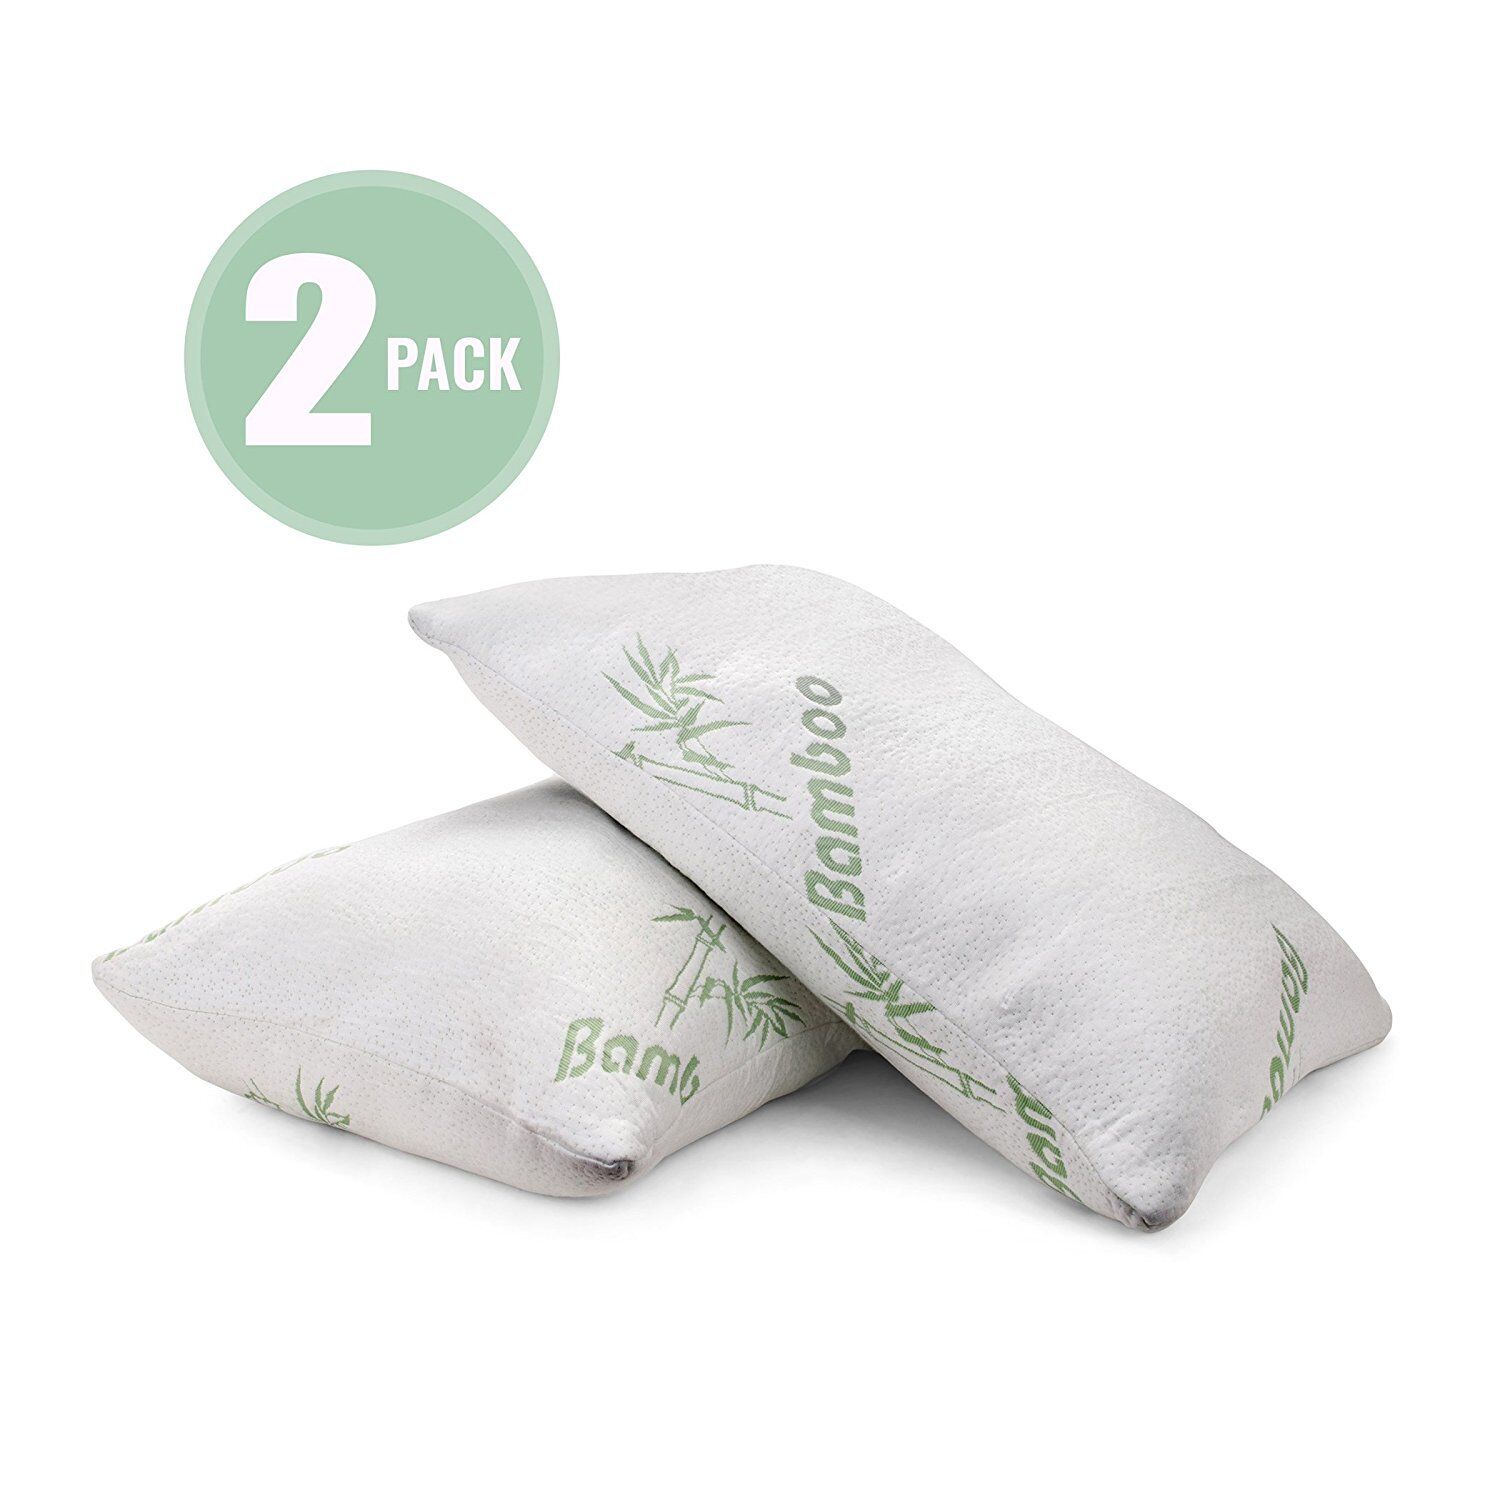 Plixio Bamboo Shredded Memory Foam Pillow with Hypoallergenic Cover 2 Pack Queen